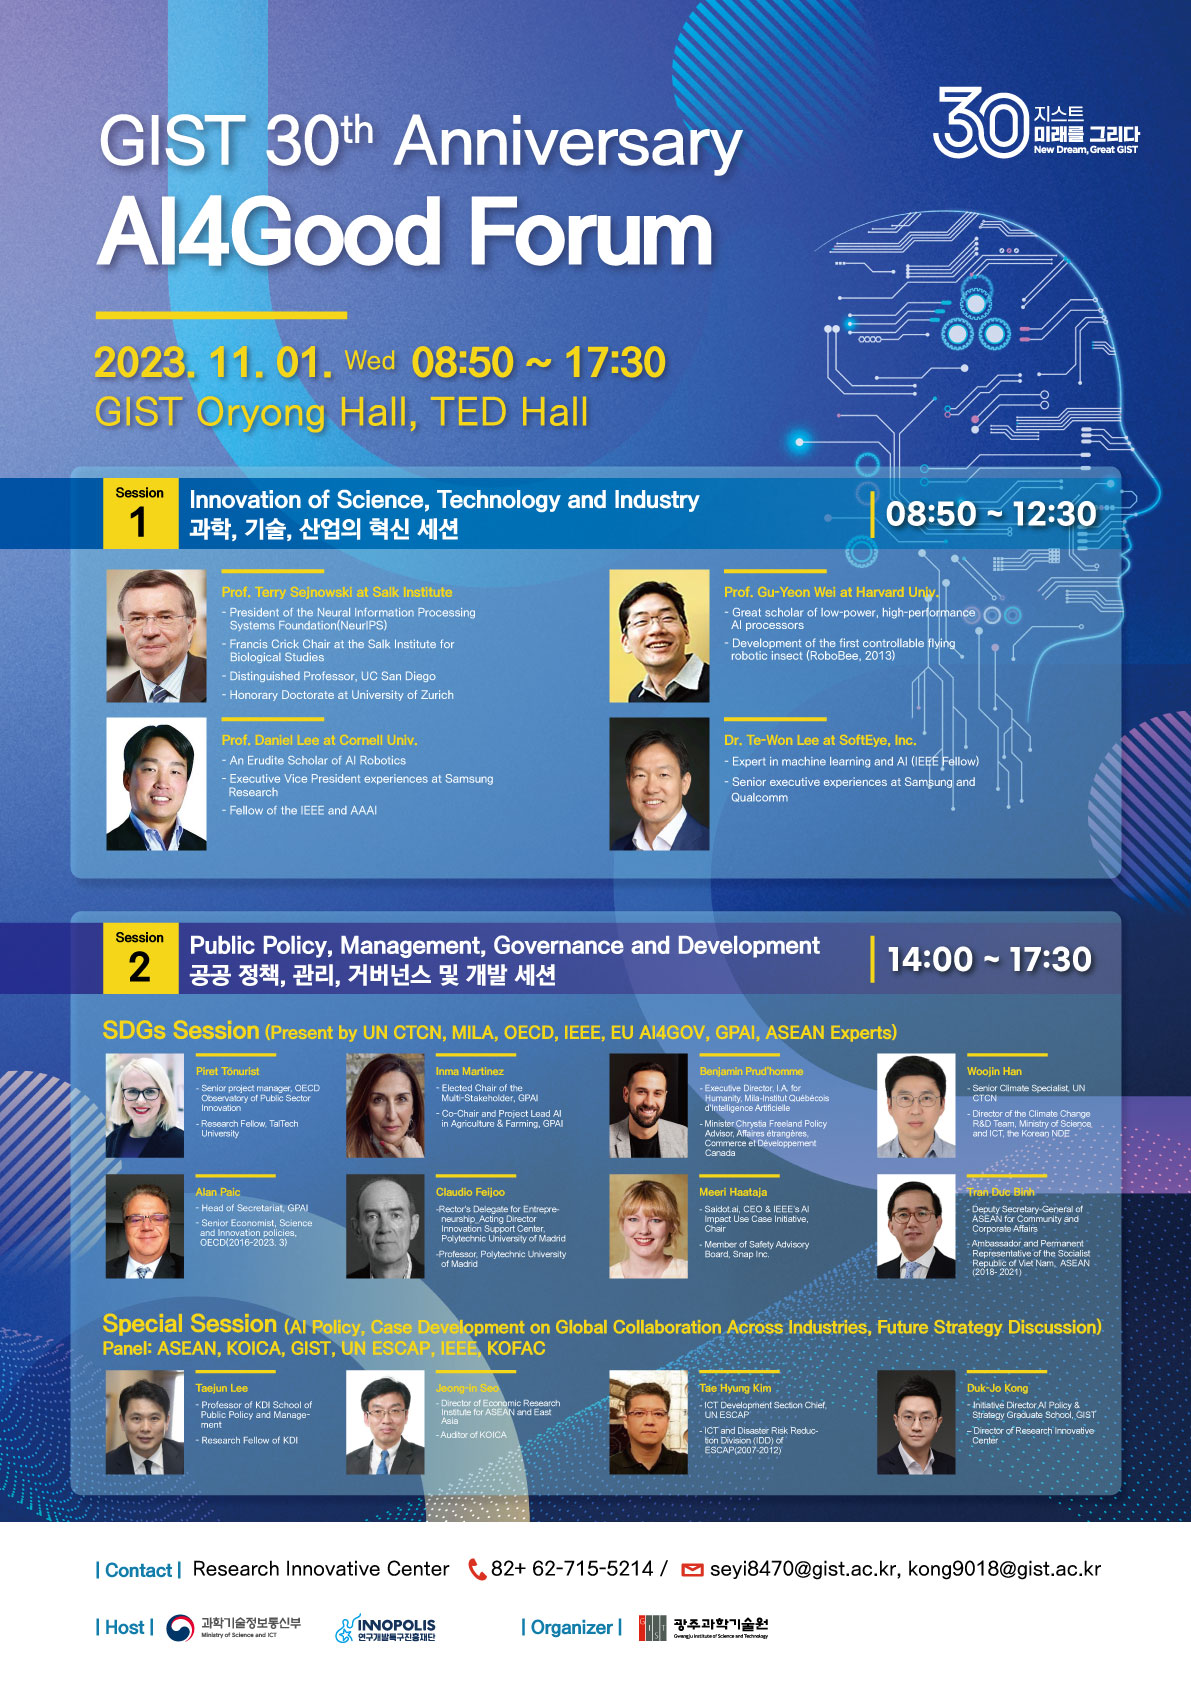 GIST holds various AI events to celebrate its 30th anniversary... AI4Good Forum with participation of world-class AI research and policy experts, etc. 이미지